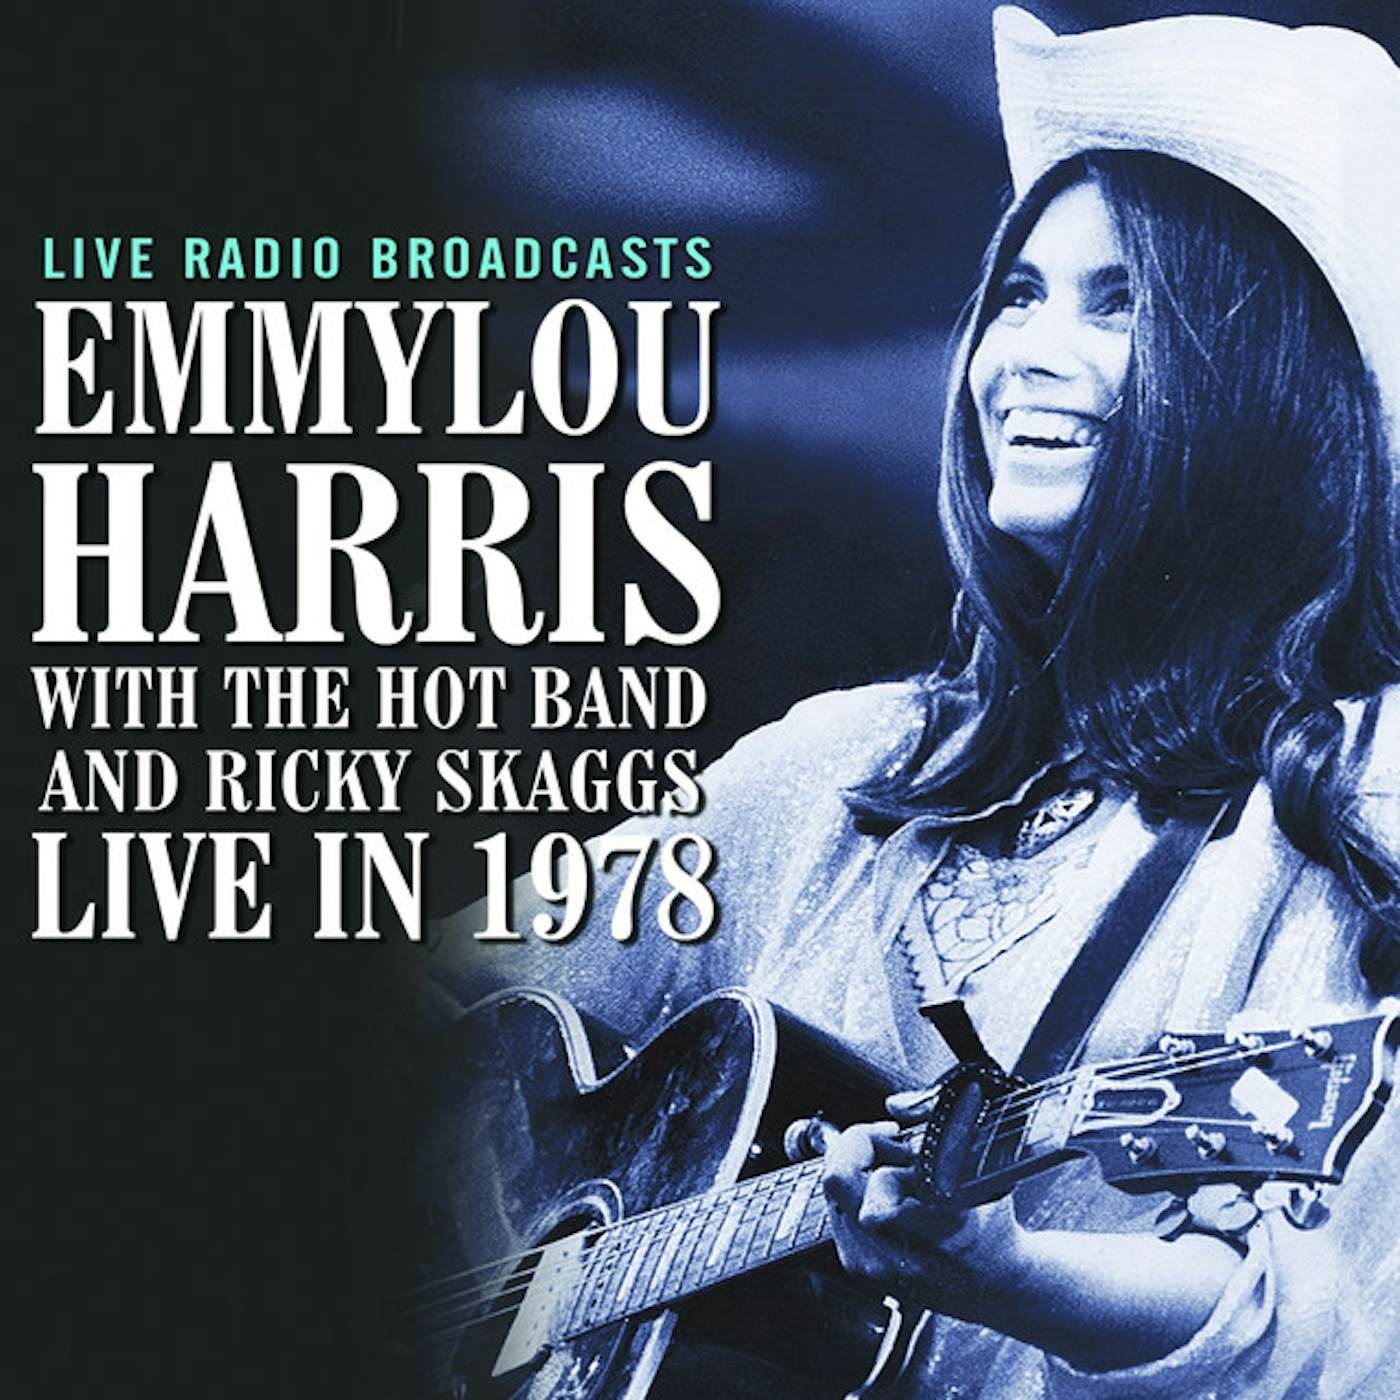 Emmylou Harris Live in 1978 Vinyl Record